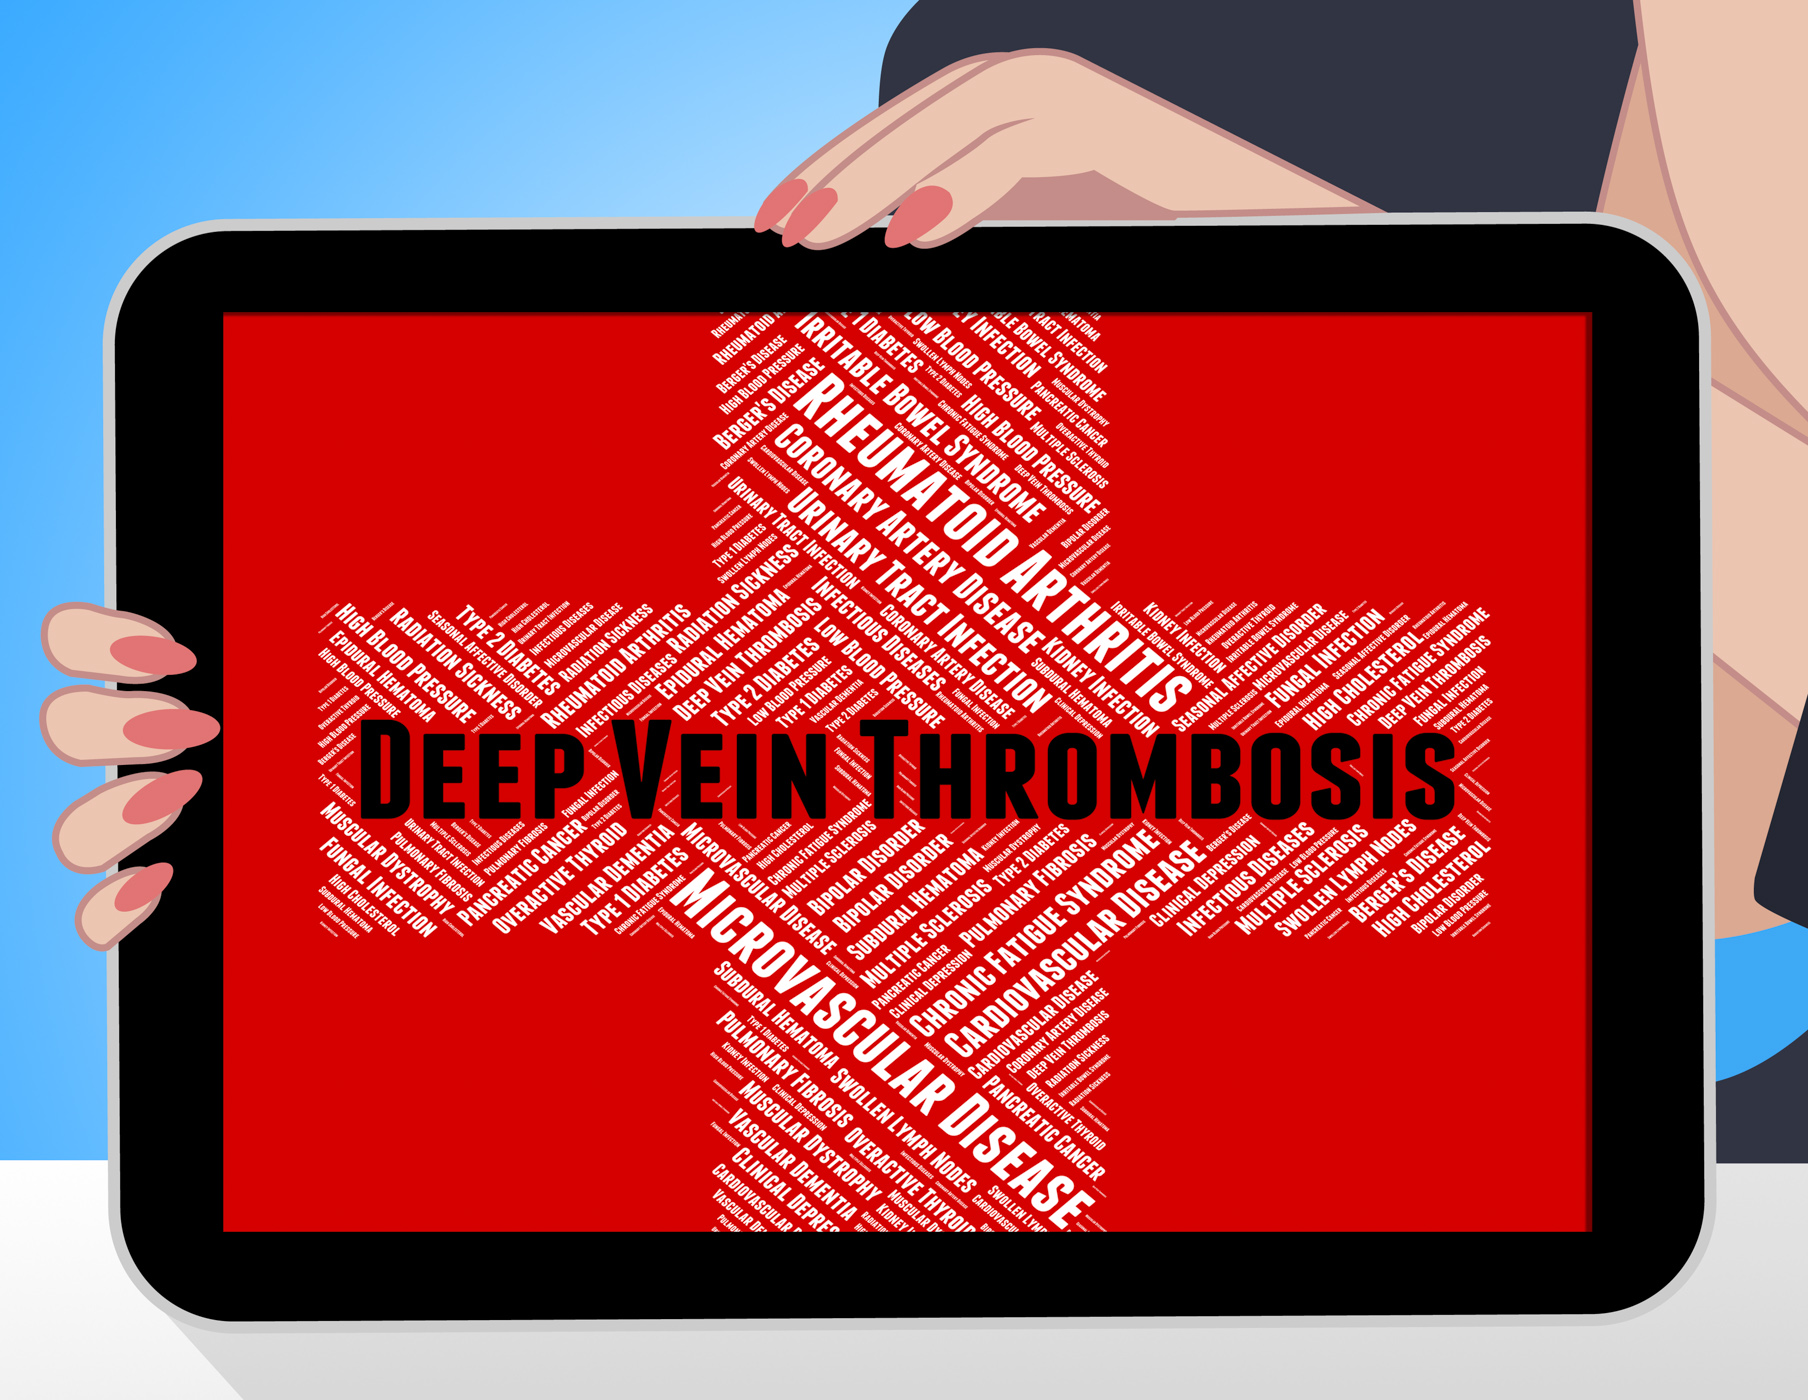 Deep vein thrombosis represents ill health and complaint photo